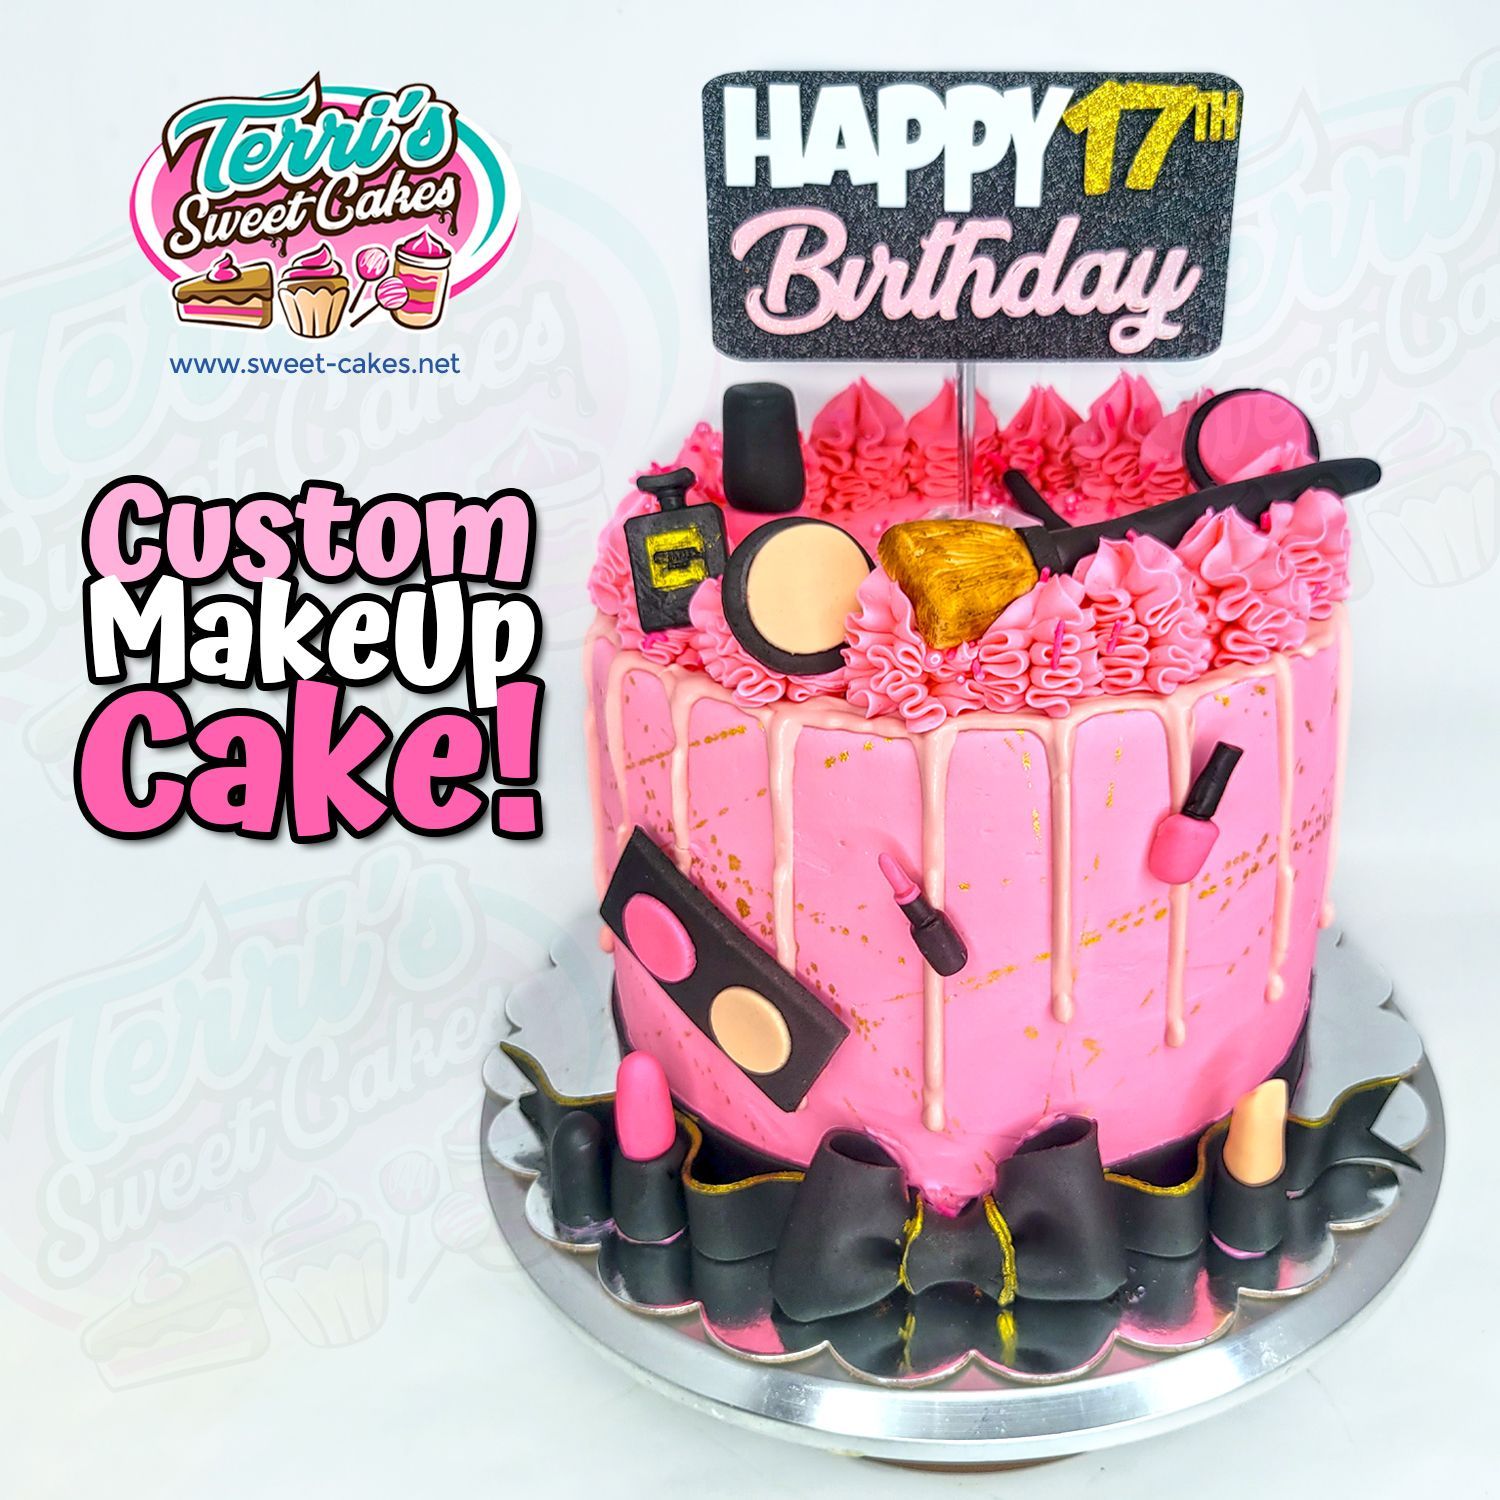 Makeup Themed Birthday Cake by Terri's Sweet Cakes